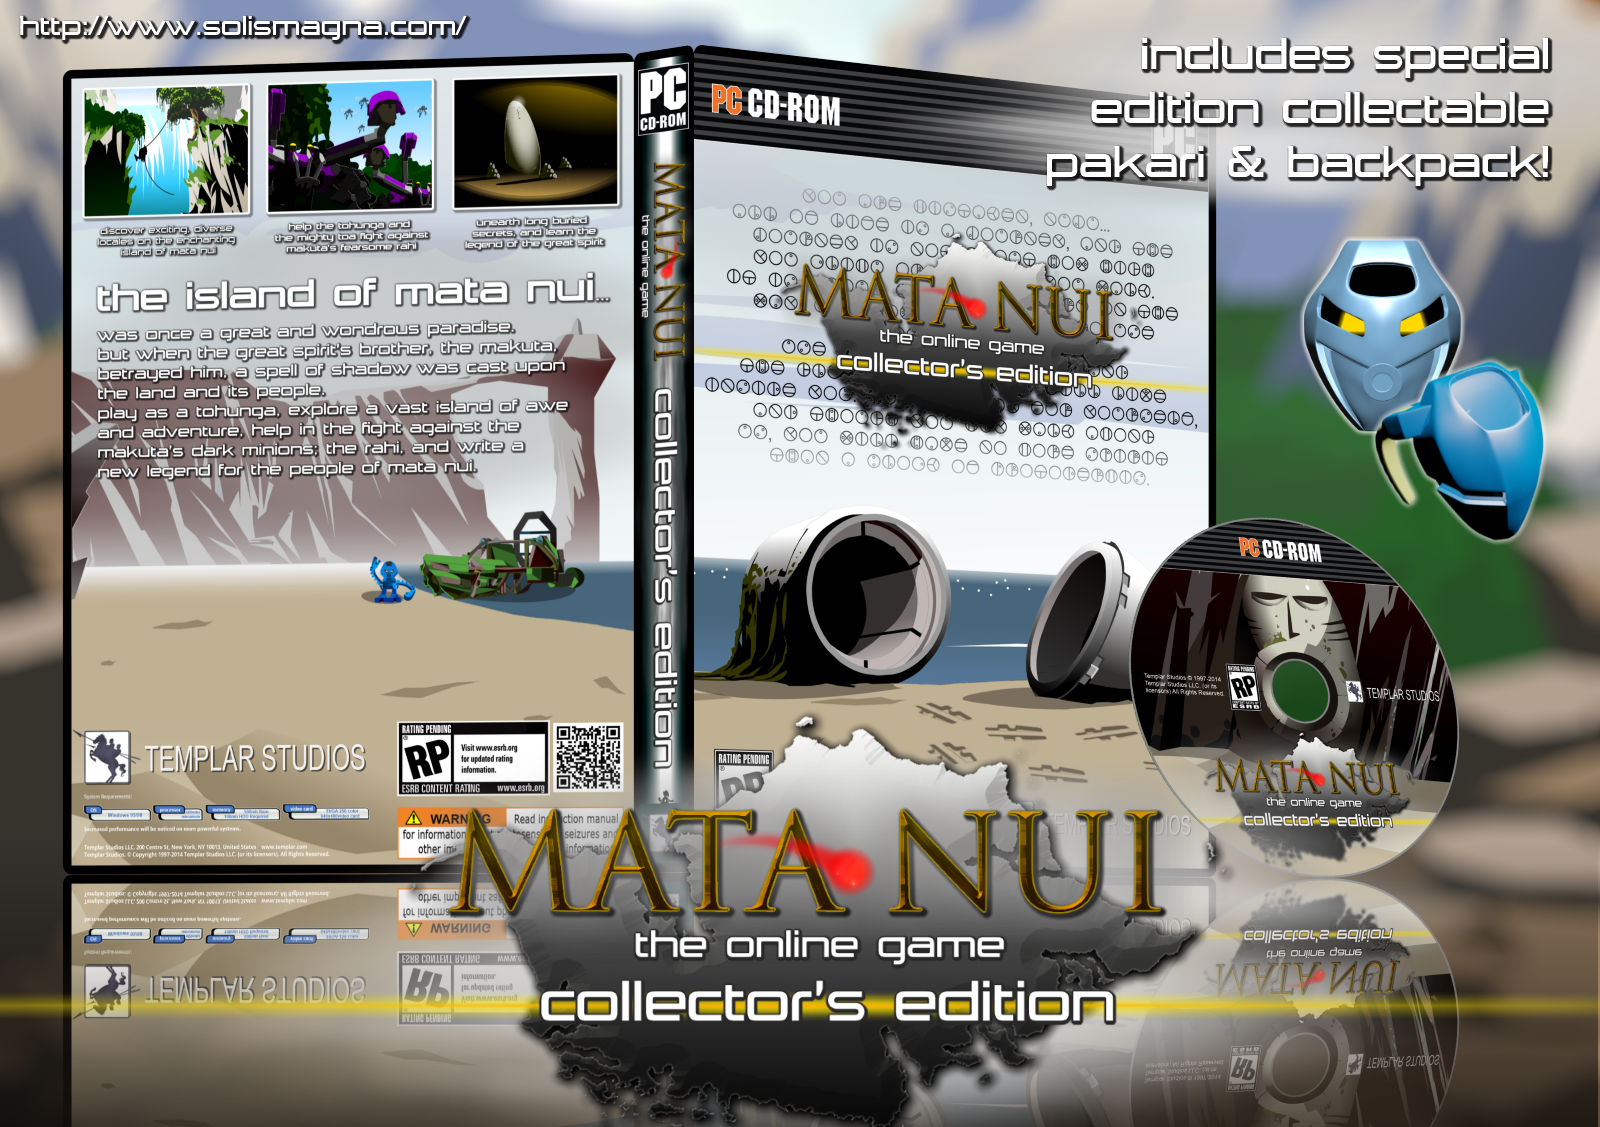 Mata Nui: The Online Game Collector's Edition box cover